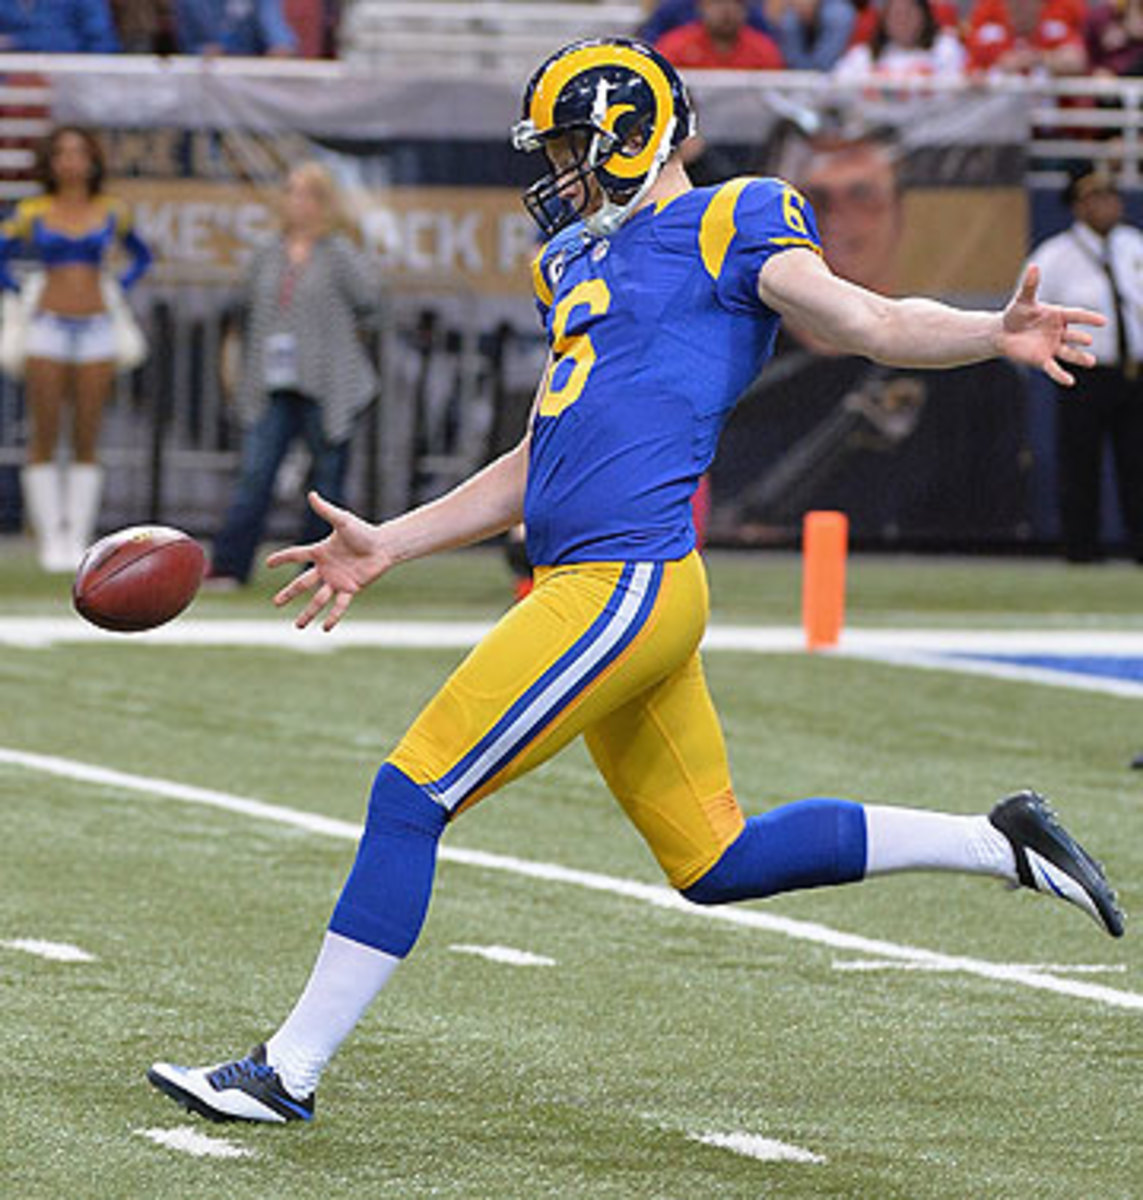 Johnny Hekker's new $19 million deal includes the highest ever guaranteed for a kicker or punter. (Michael Thomas/Getty Images)